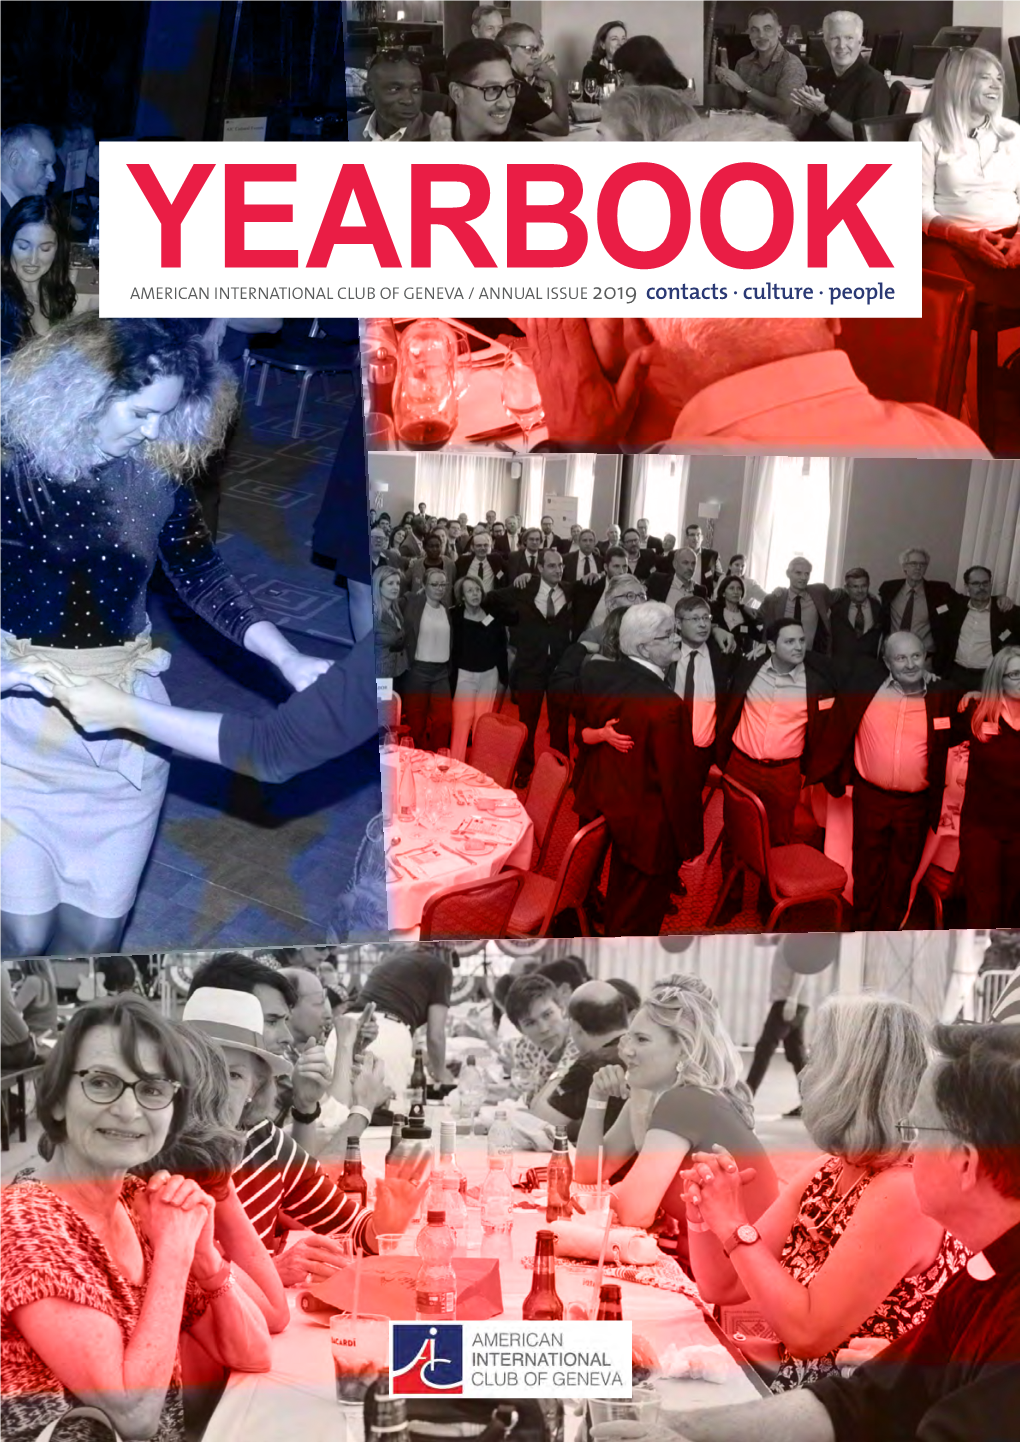 YEARBOOKAMERICAN INTERNATIONAL CLUB of GENEVA / ANNUAL ISSUE 2019 Contacts